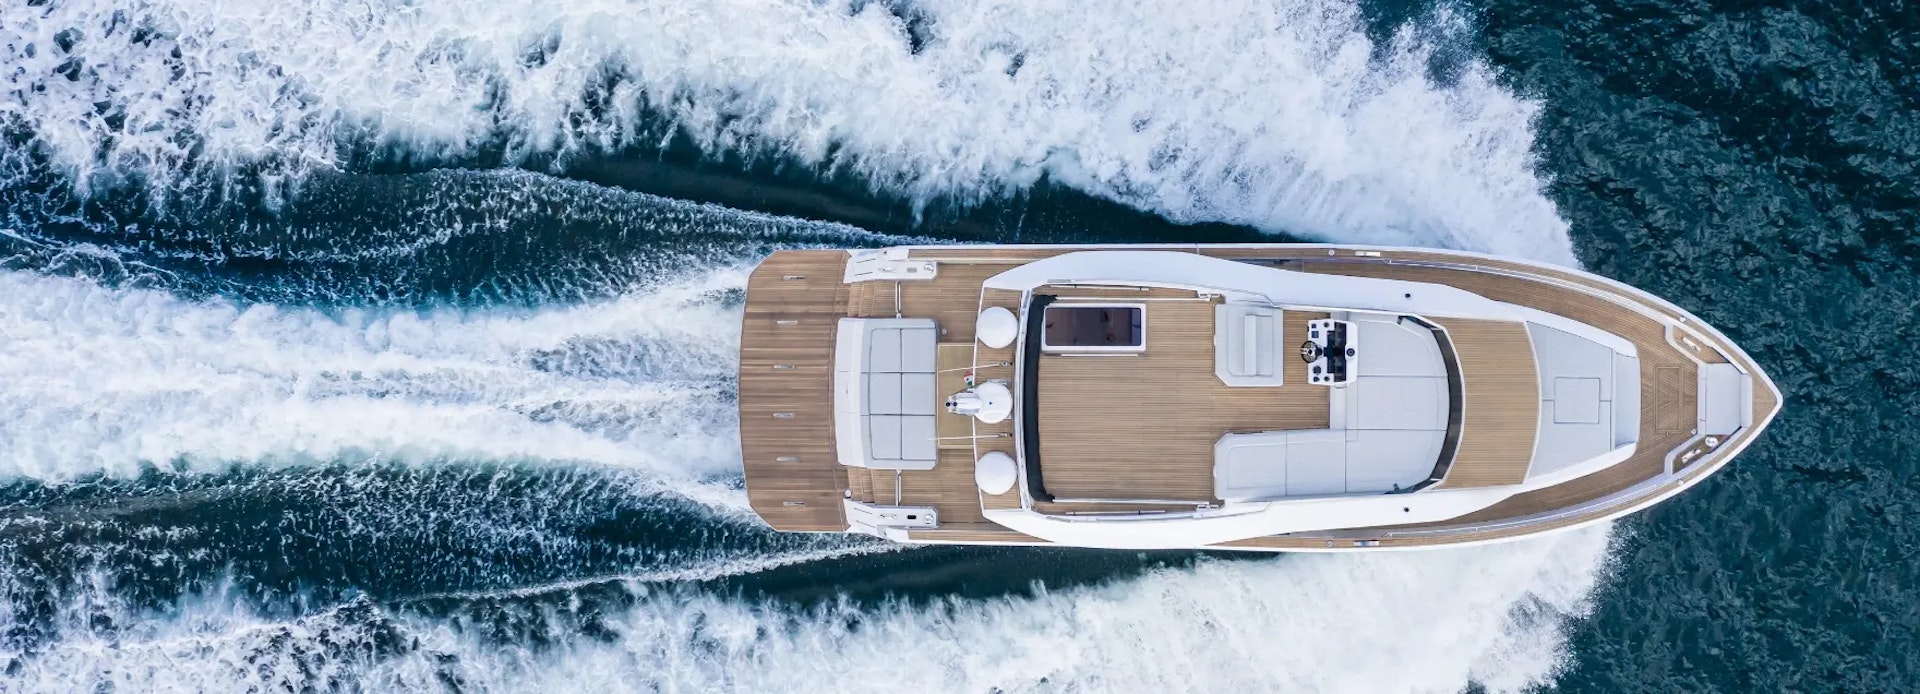 Overhead image of yacht on the water